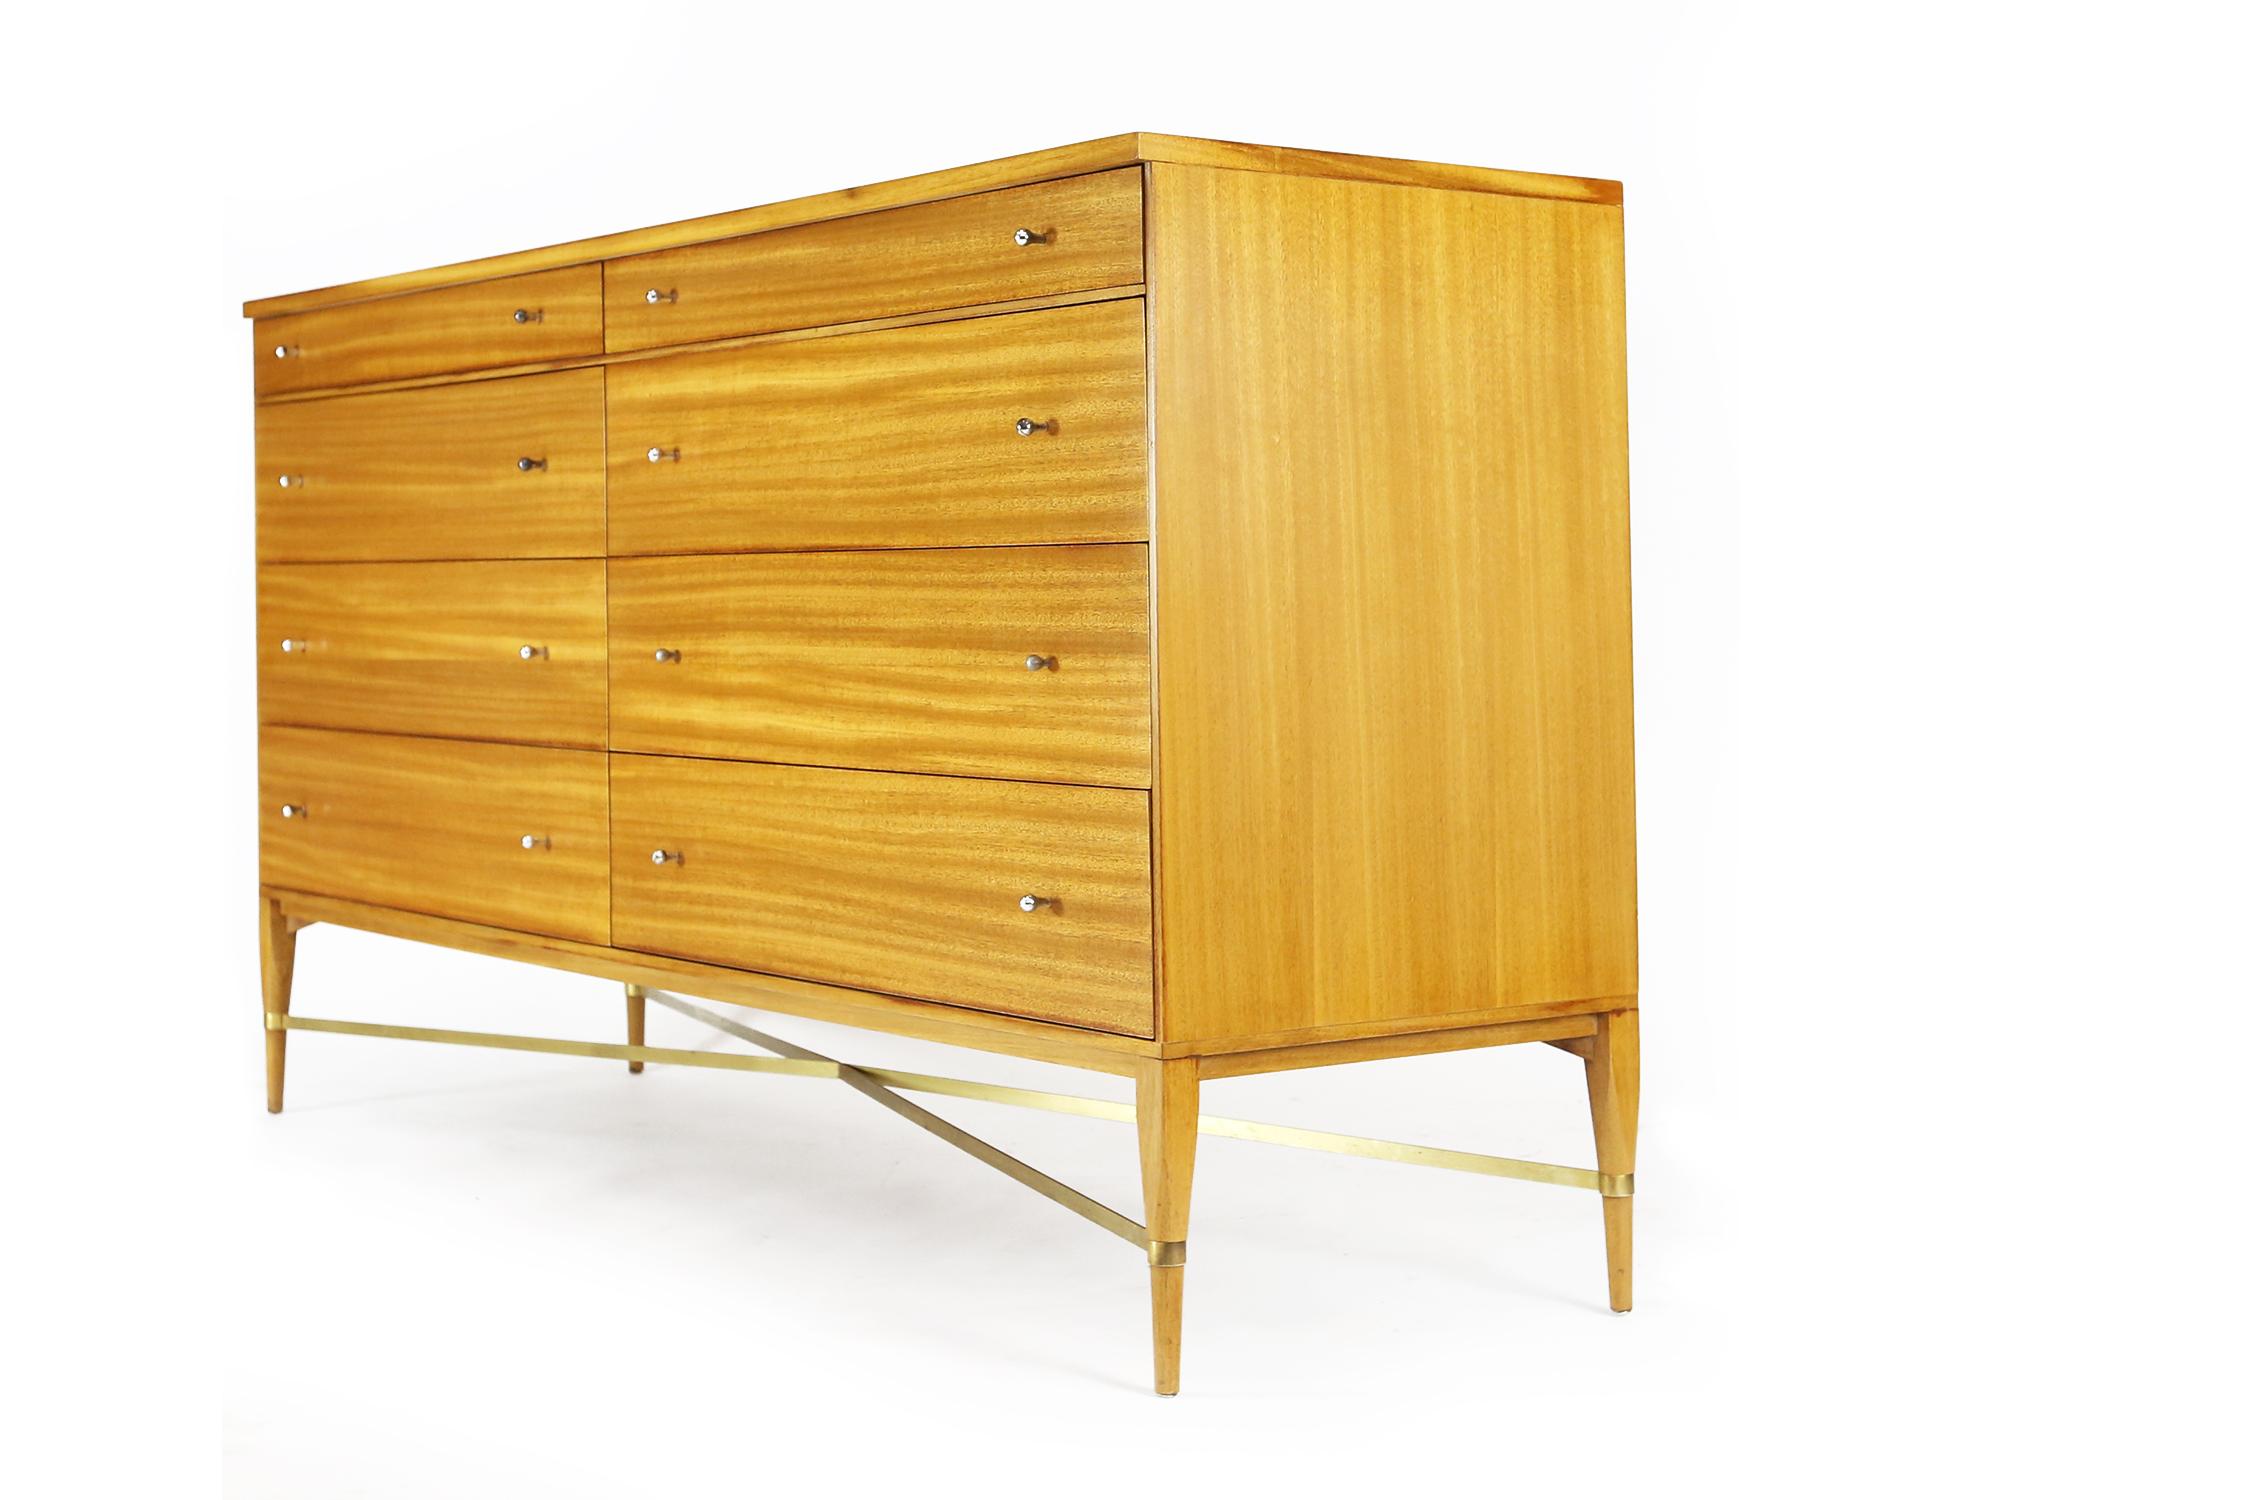 Paul McCobb for Calvin eight-drawer dresser with brass cross stretchers. Bleached ribbon mahogany. Expertly refinished and restored to it's original finish. With the original Calvin label in one of the drawers.